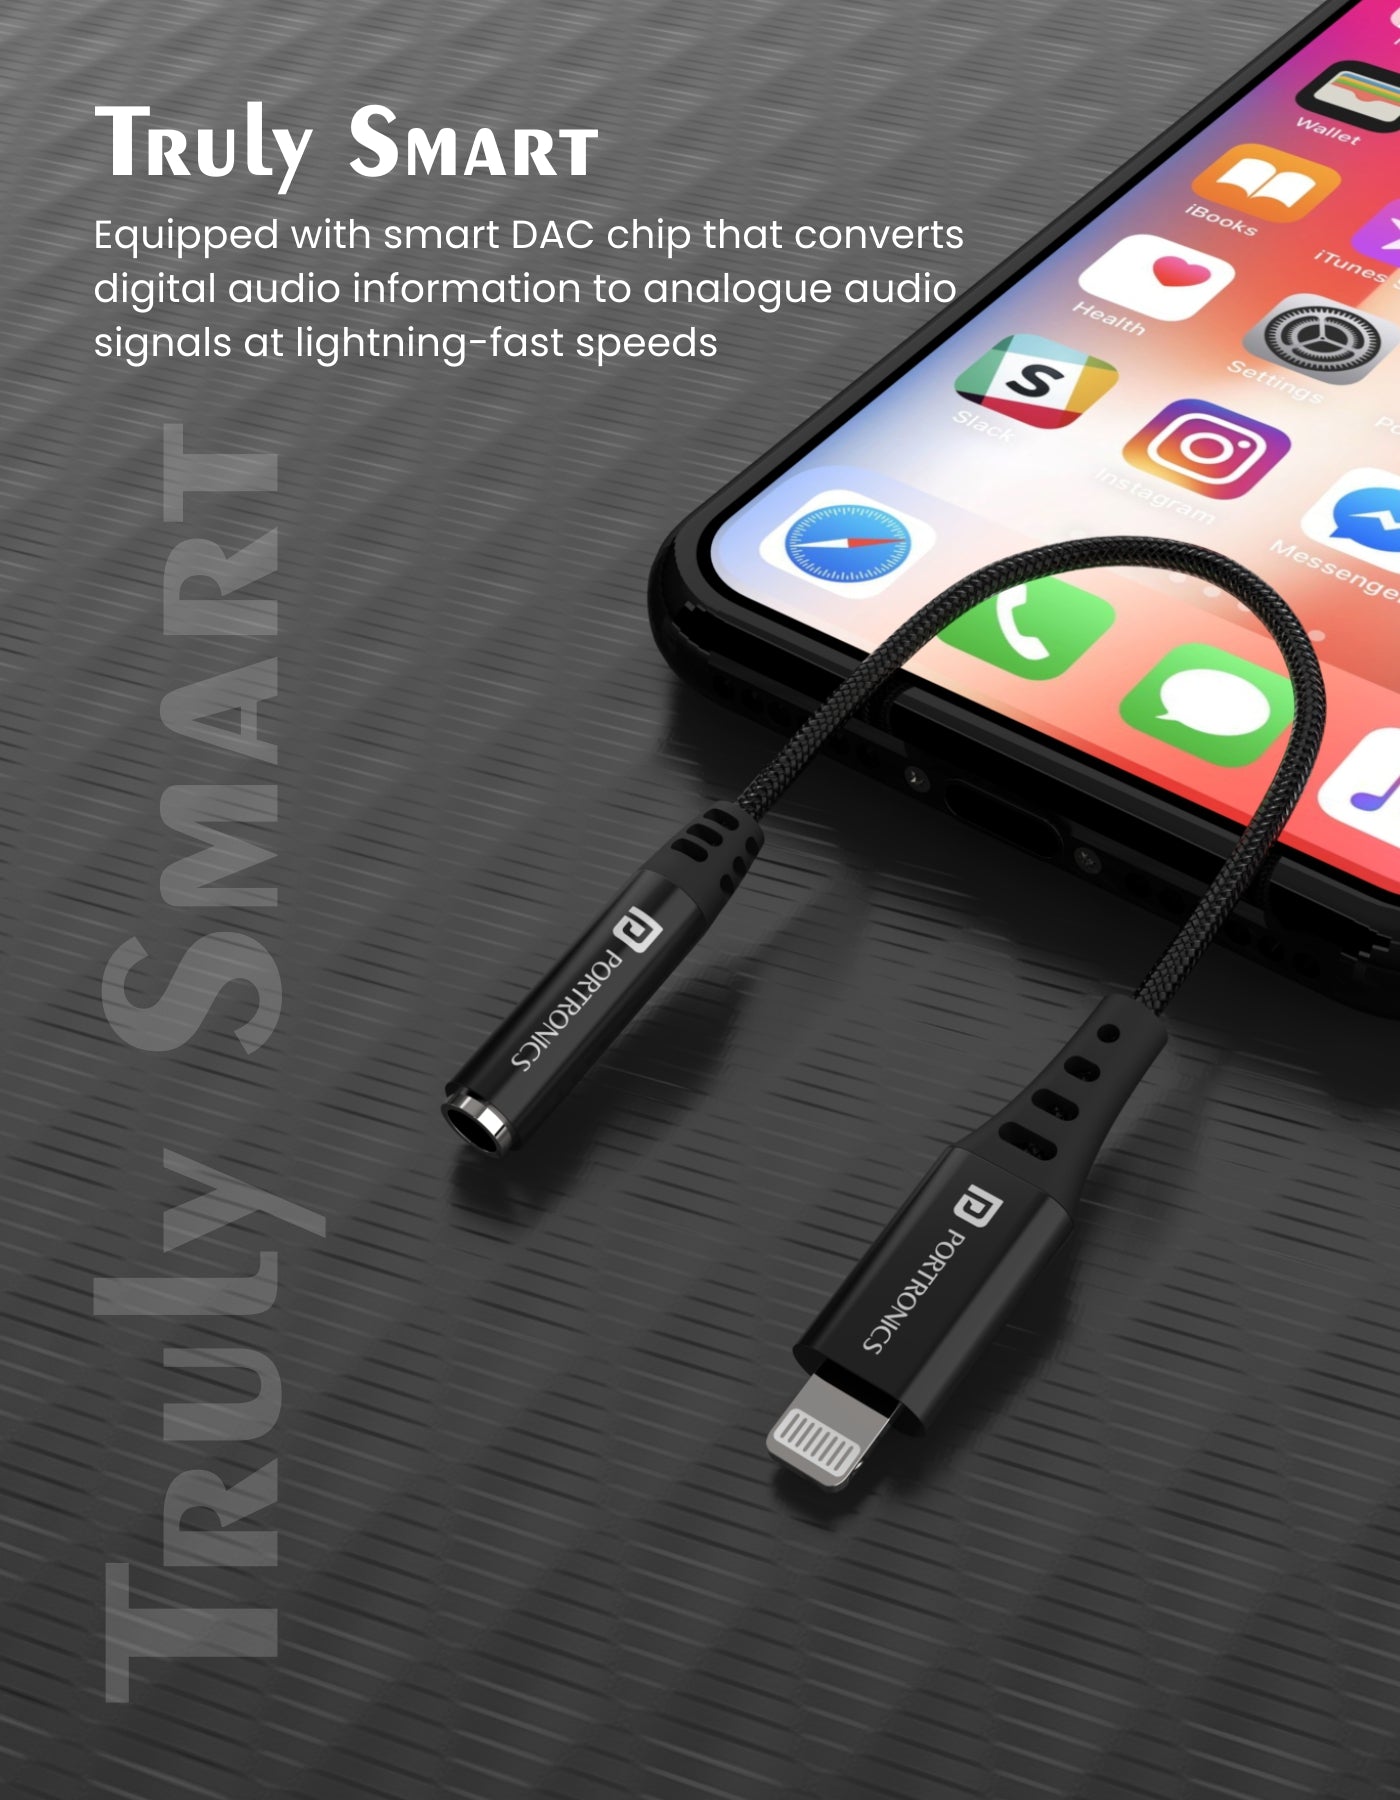 Portronics ikonnect 3, 8 pin to 3.5 mm AUX Connector Smart DAC Chip for swift audio transfer with ikonnect 3 car charger